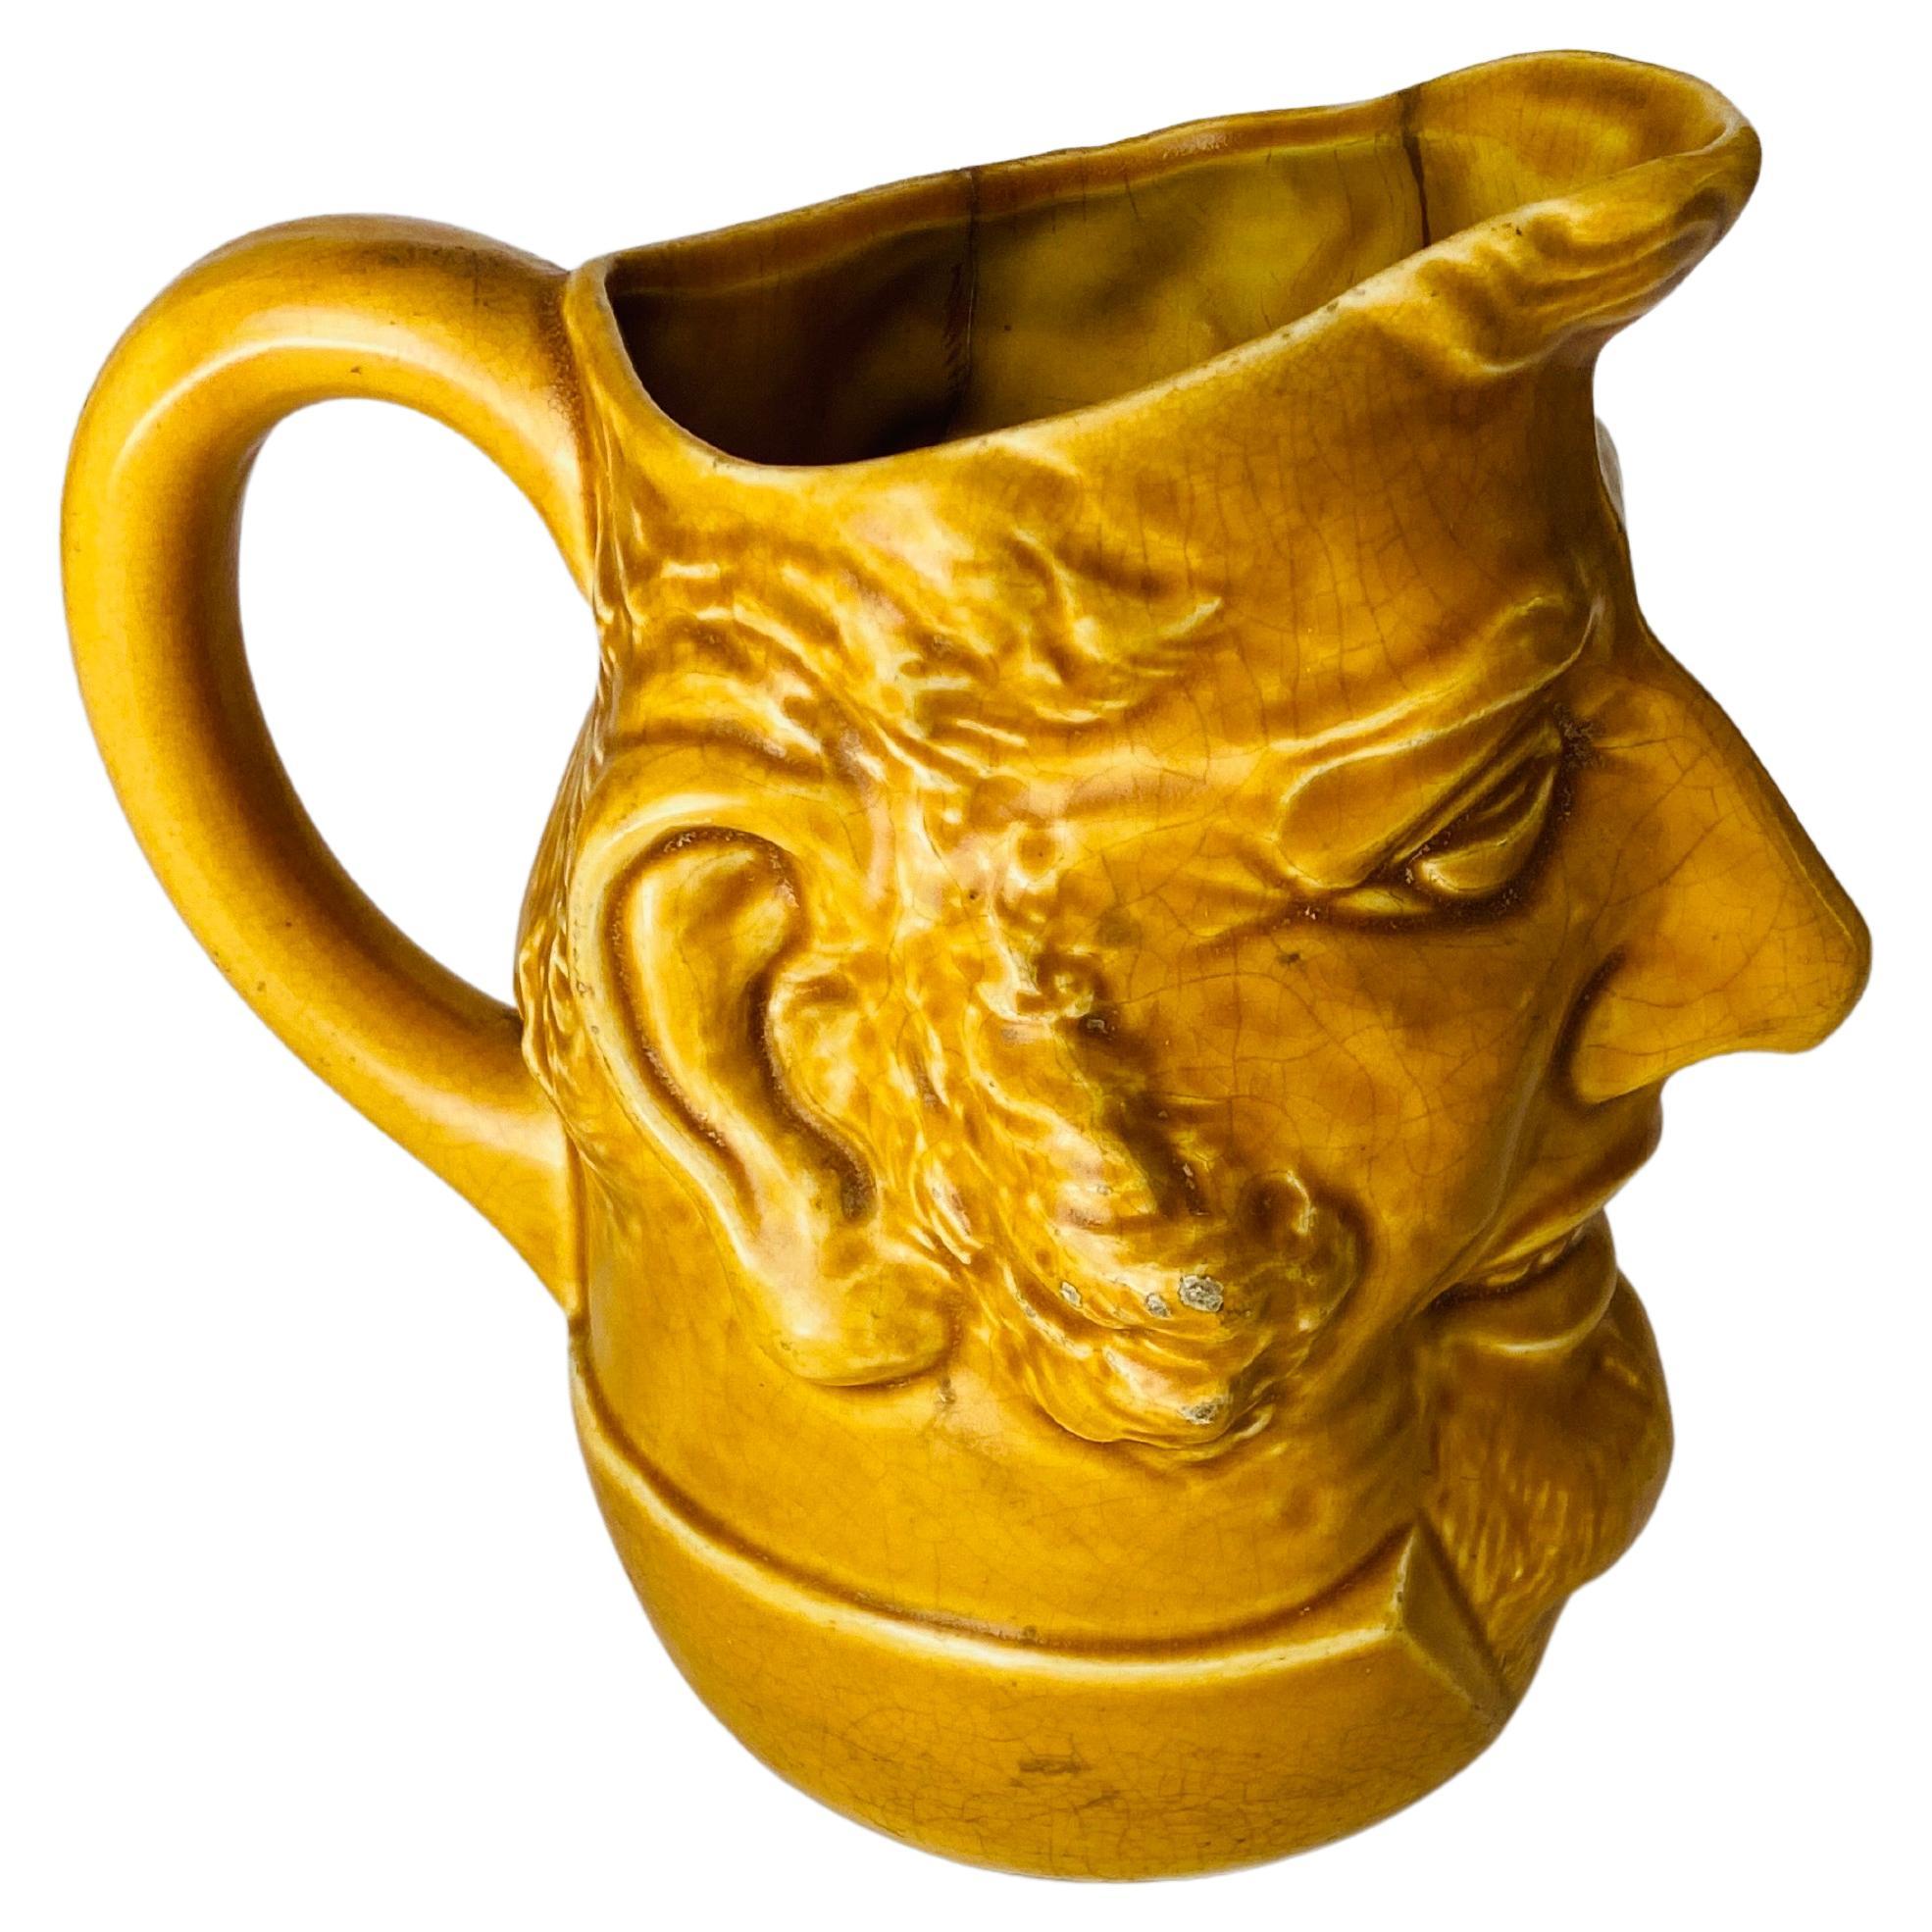 This Pitcher is made of ceramic, with a very original shape. It is Yellow in color, and was created in the 1970s in Vallauris, France.
The shape is a Man Face.